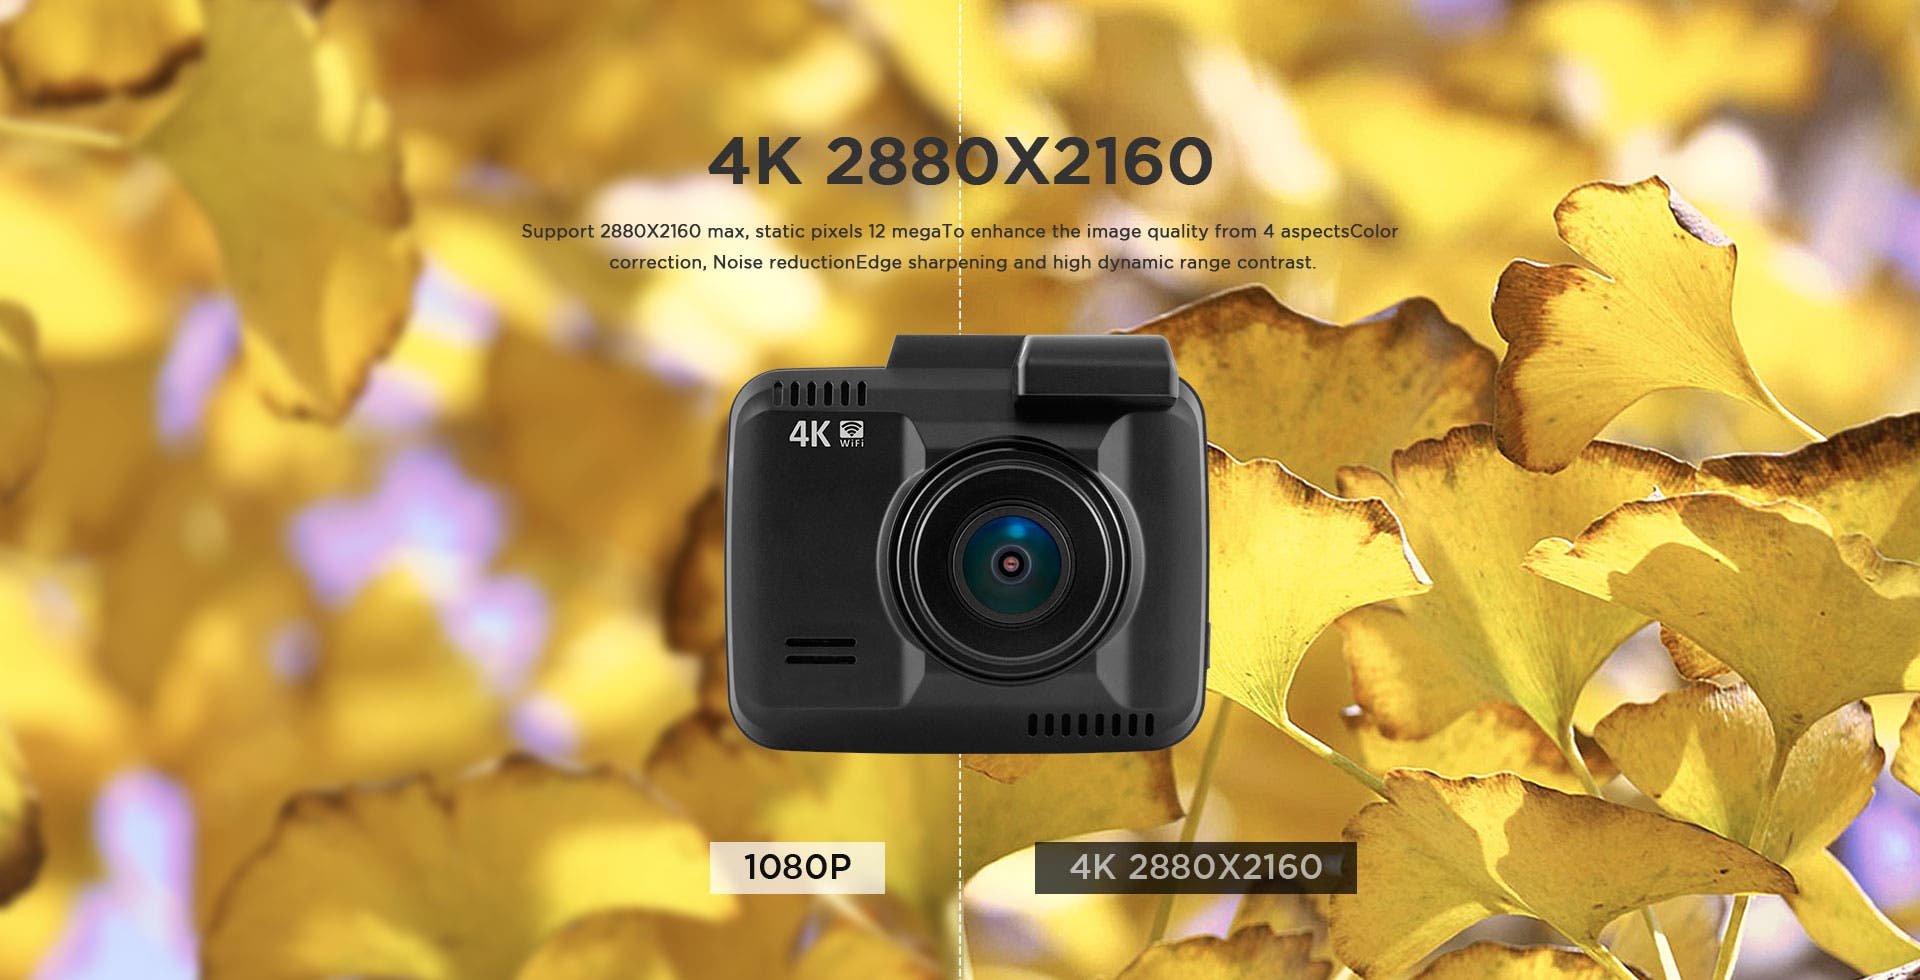 Azdome Launches the First 4K DashCam - Meet the Azdome GS63H 